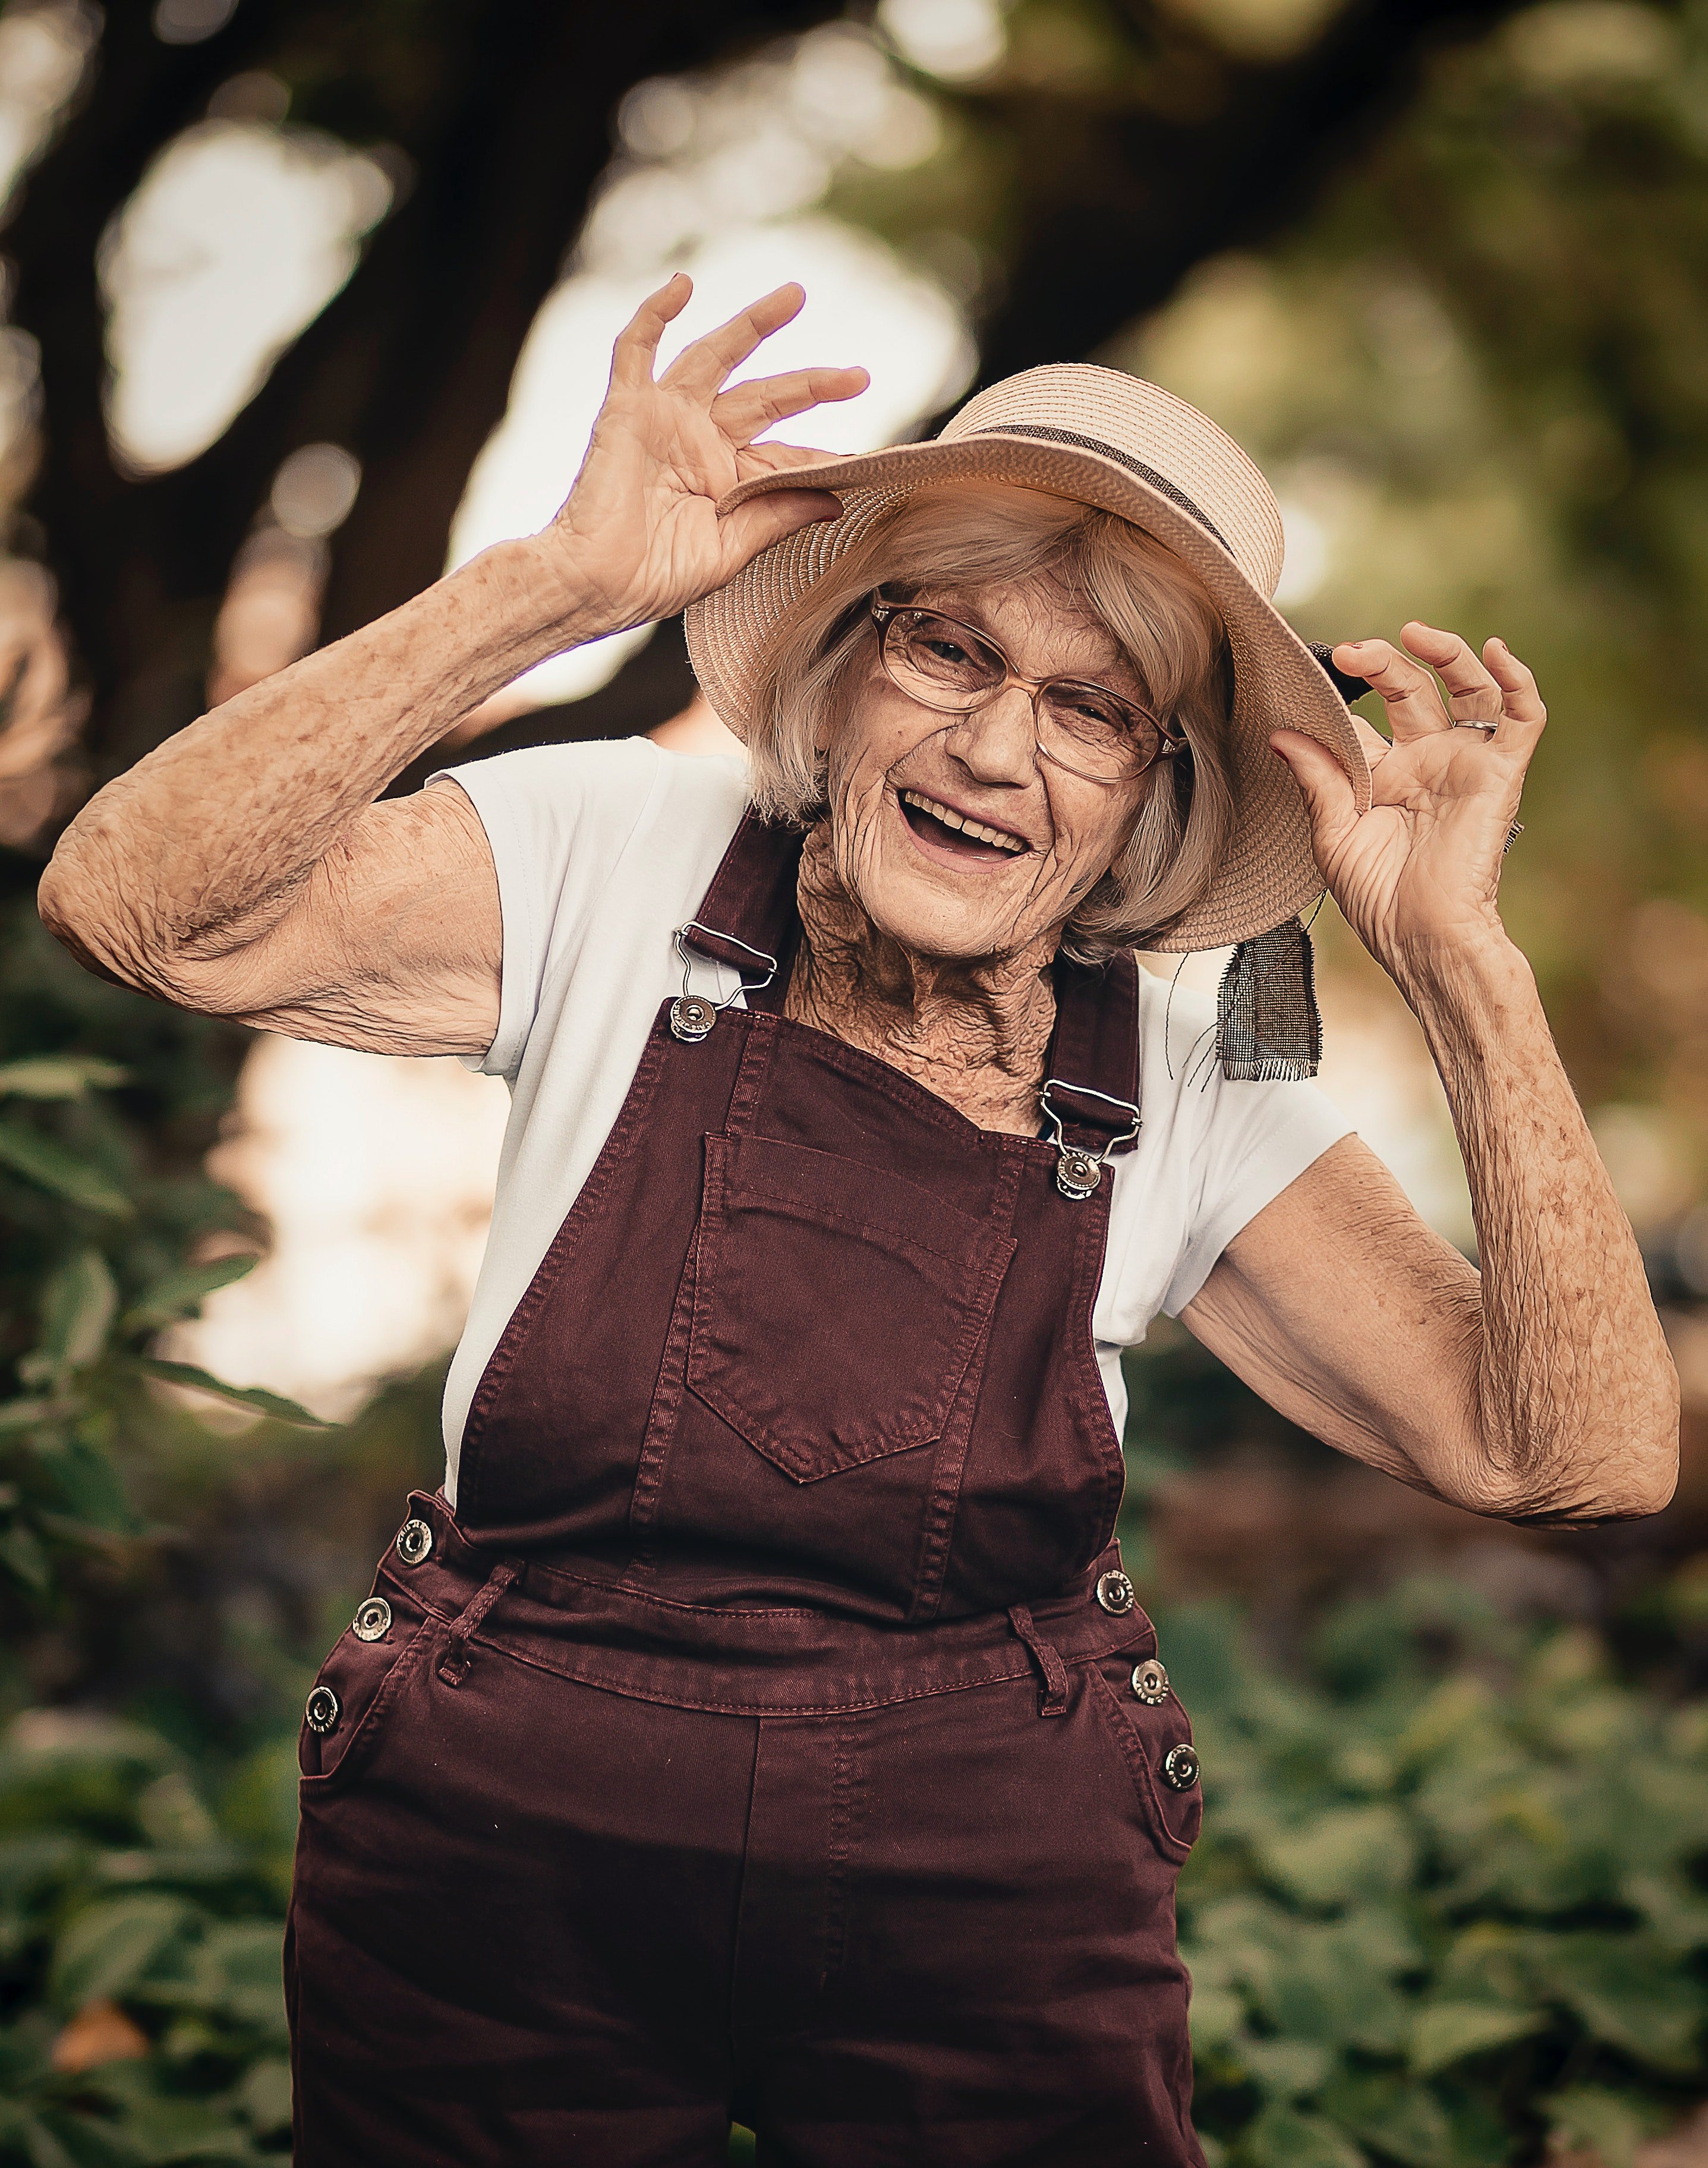 Pictured - An older woman posing near a green plant | Source: Pexels 